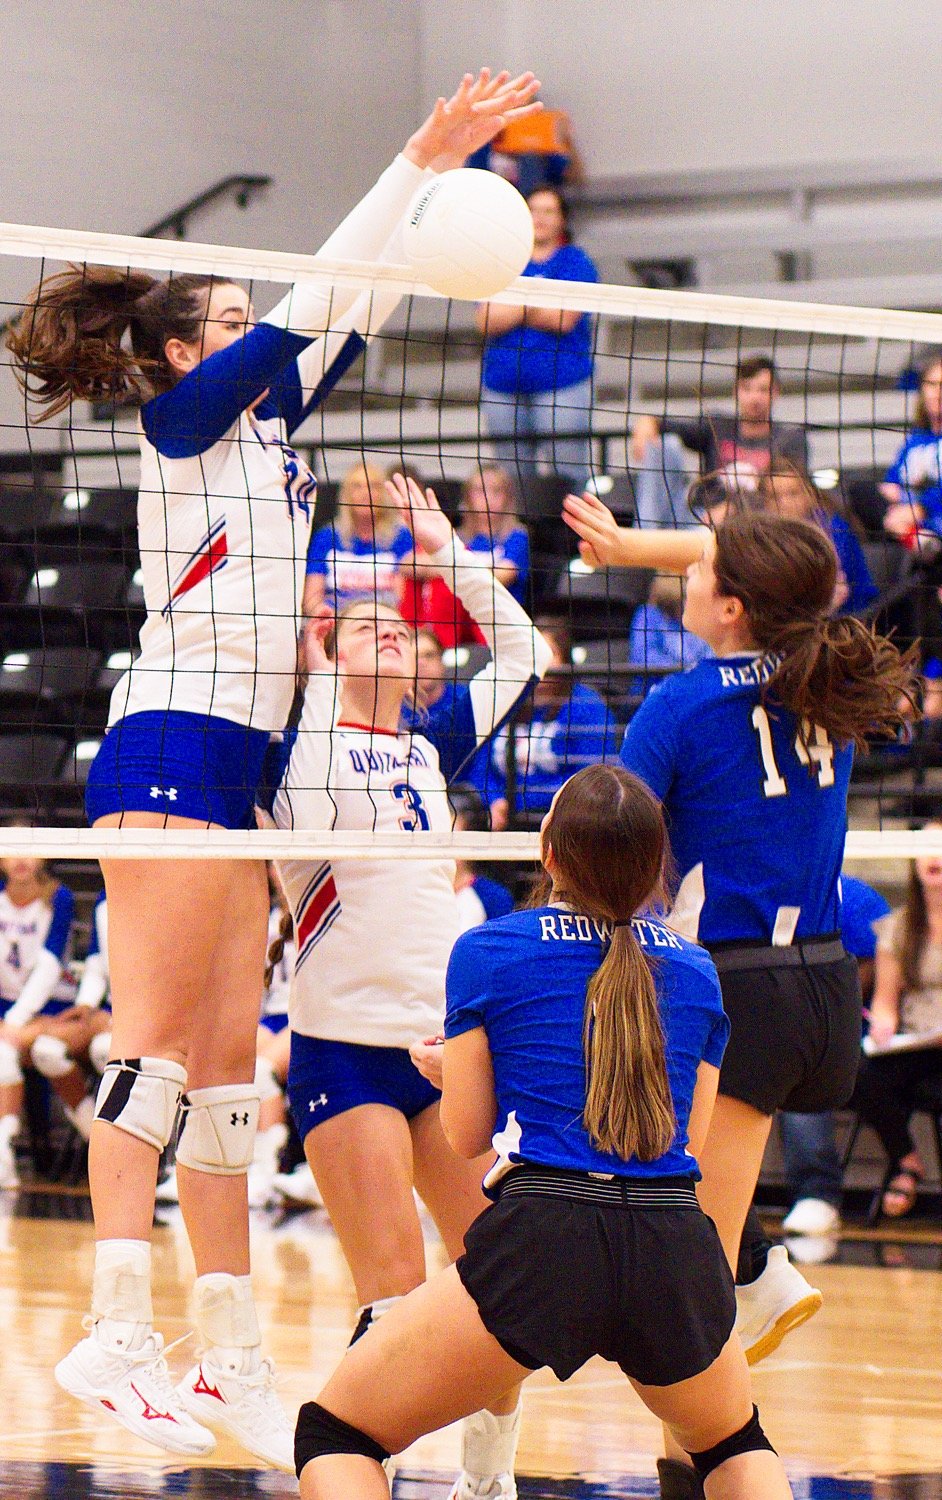 District 13-3A blocker of the year Ava Burroughs tallies another block against Redwater Nov. 1 in Pittsburg.